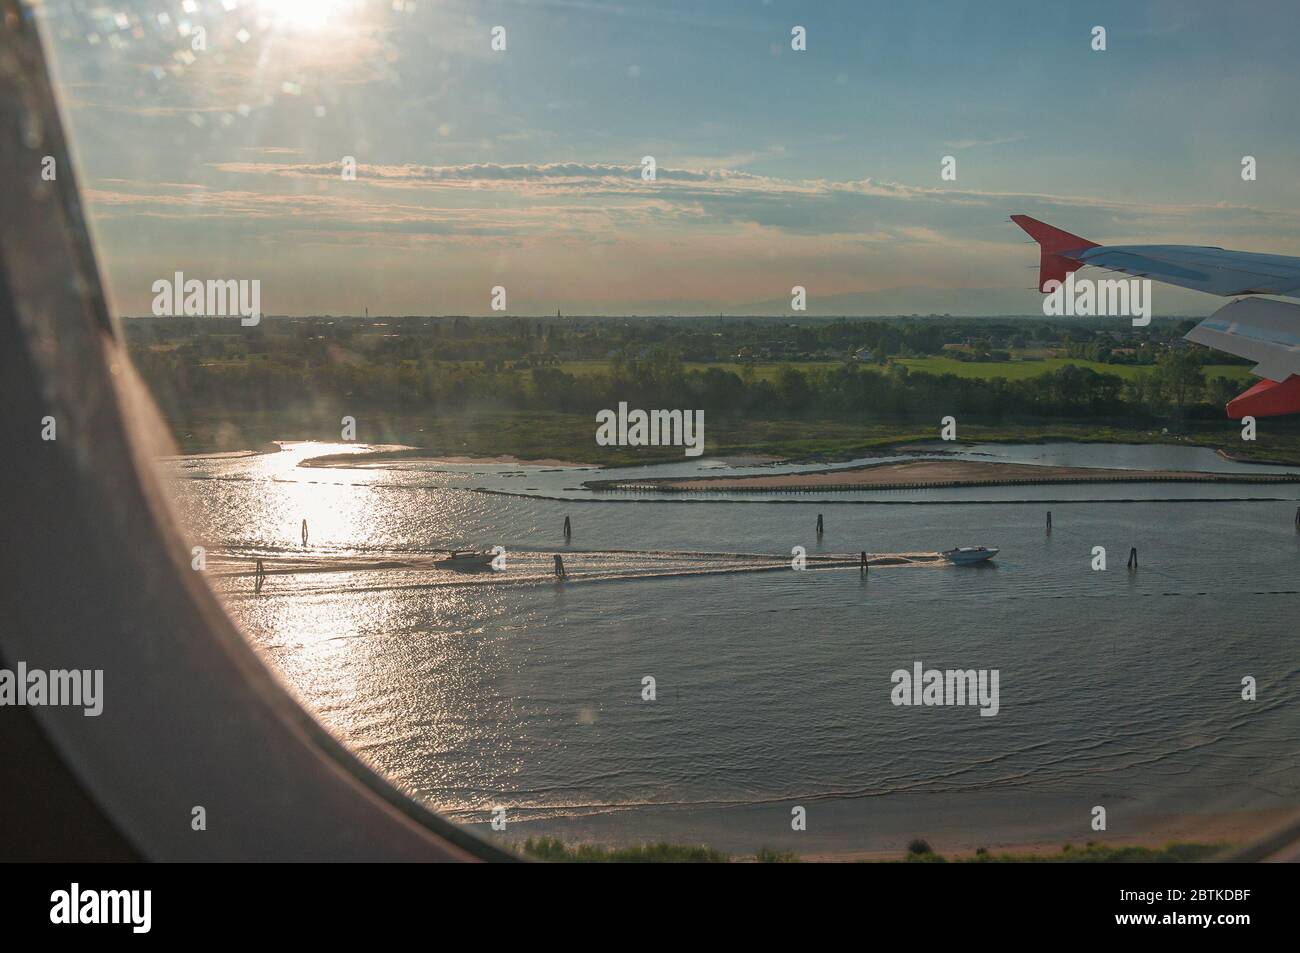 View of boat sailing in the Venice lagoon from an airliner porthole, Italy. Concept: air travel, aerial panoramas Stock Photo